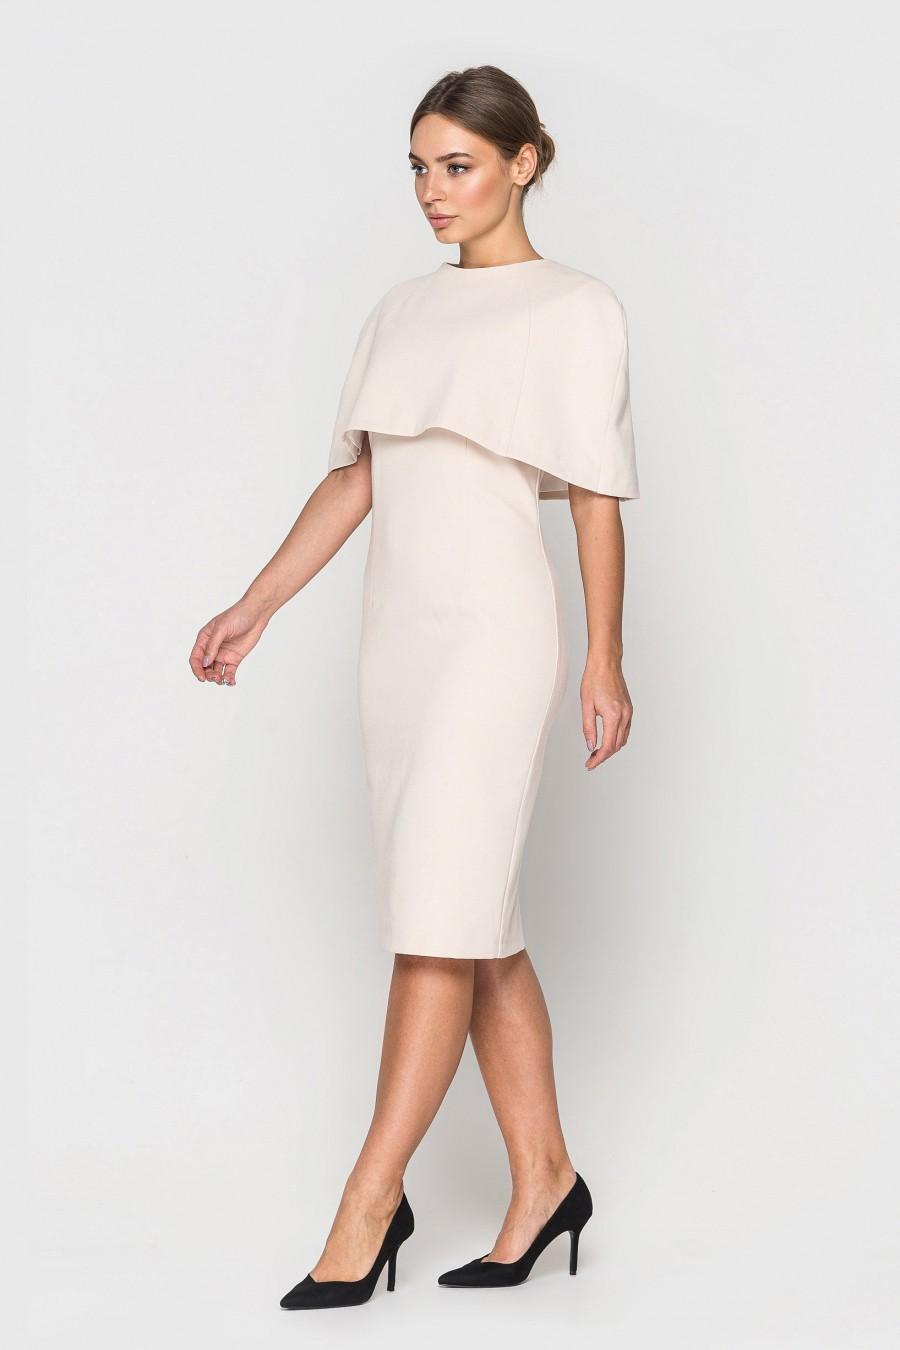 Mariage - Cape dress "MEGAN style" in vanilla beige, classic shift dress with a cape for wedding or business